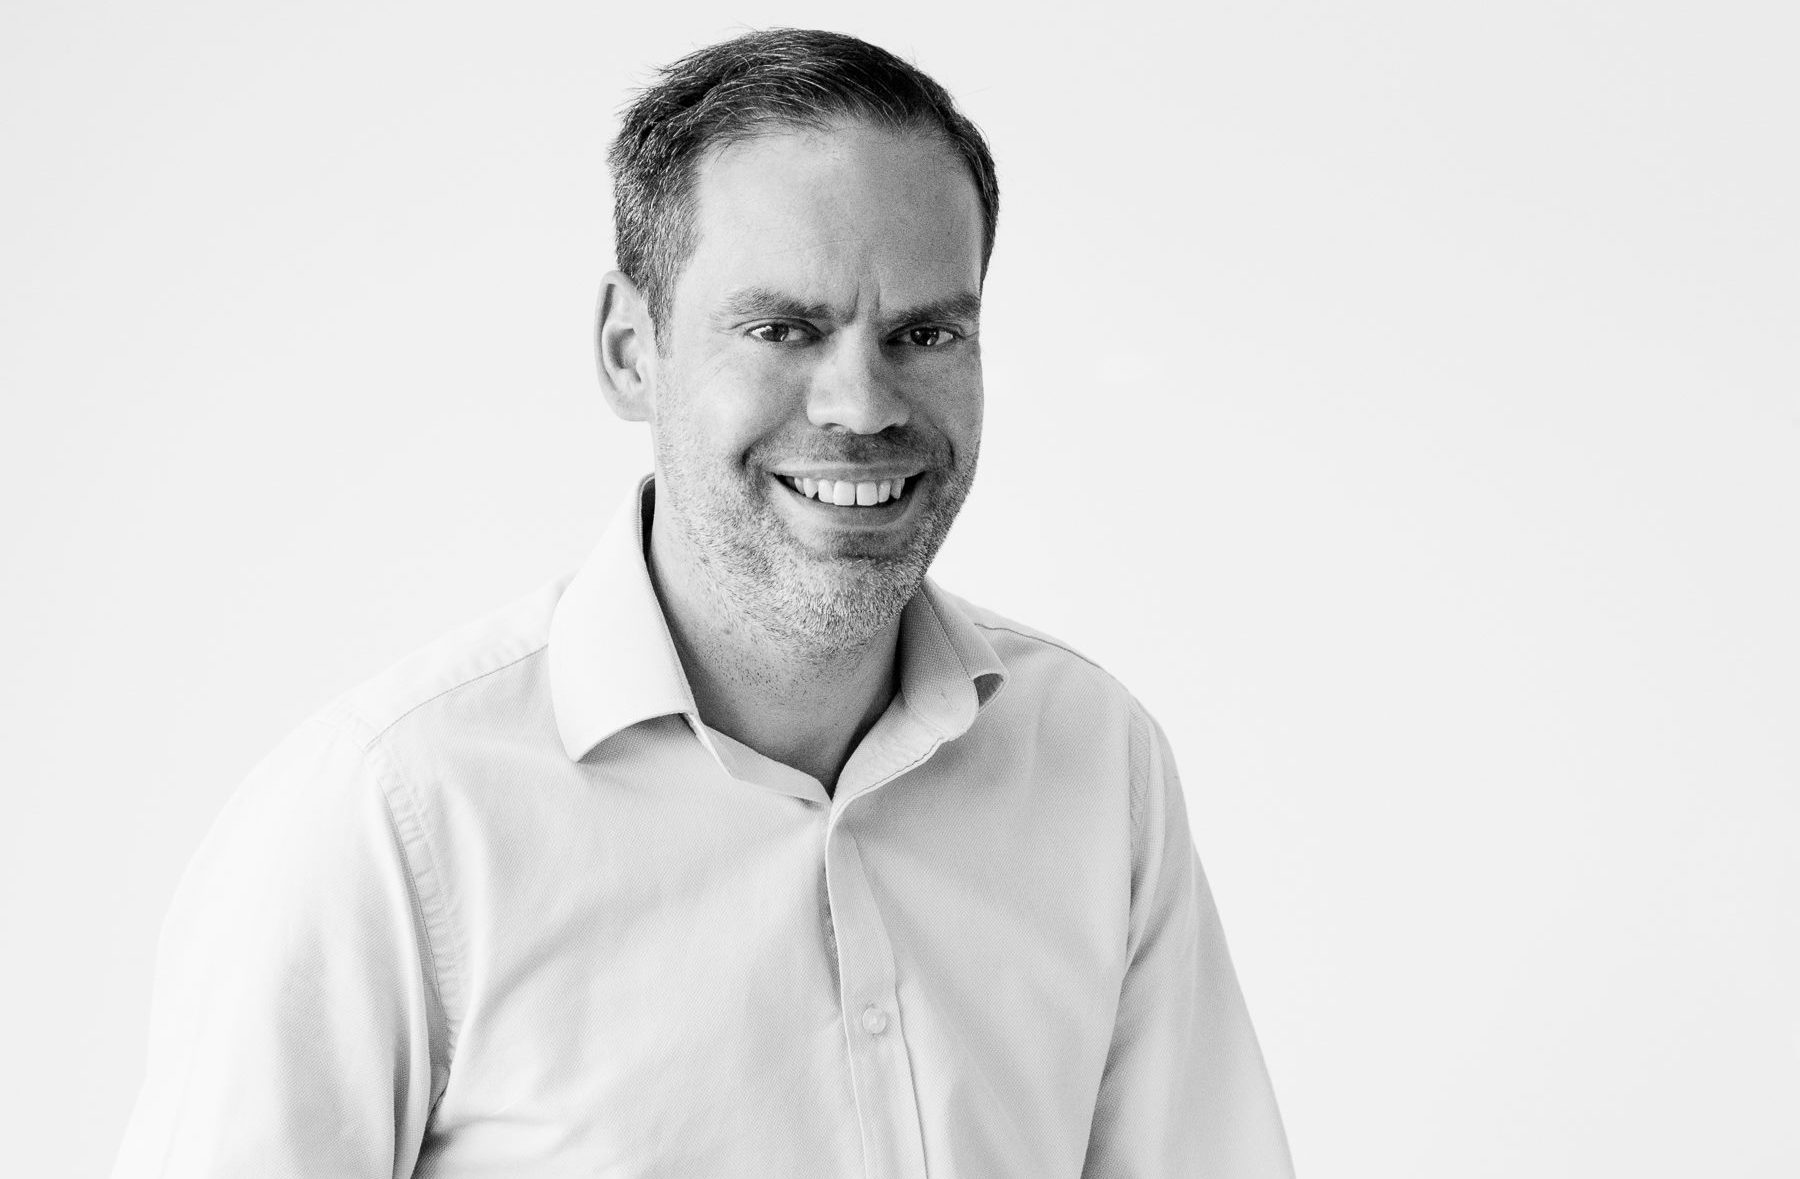 A black and white portrait of John Adams, the man behind DadBlogUK, smiling to camera